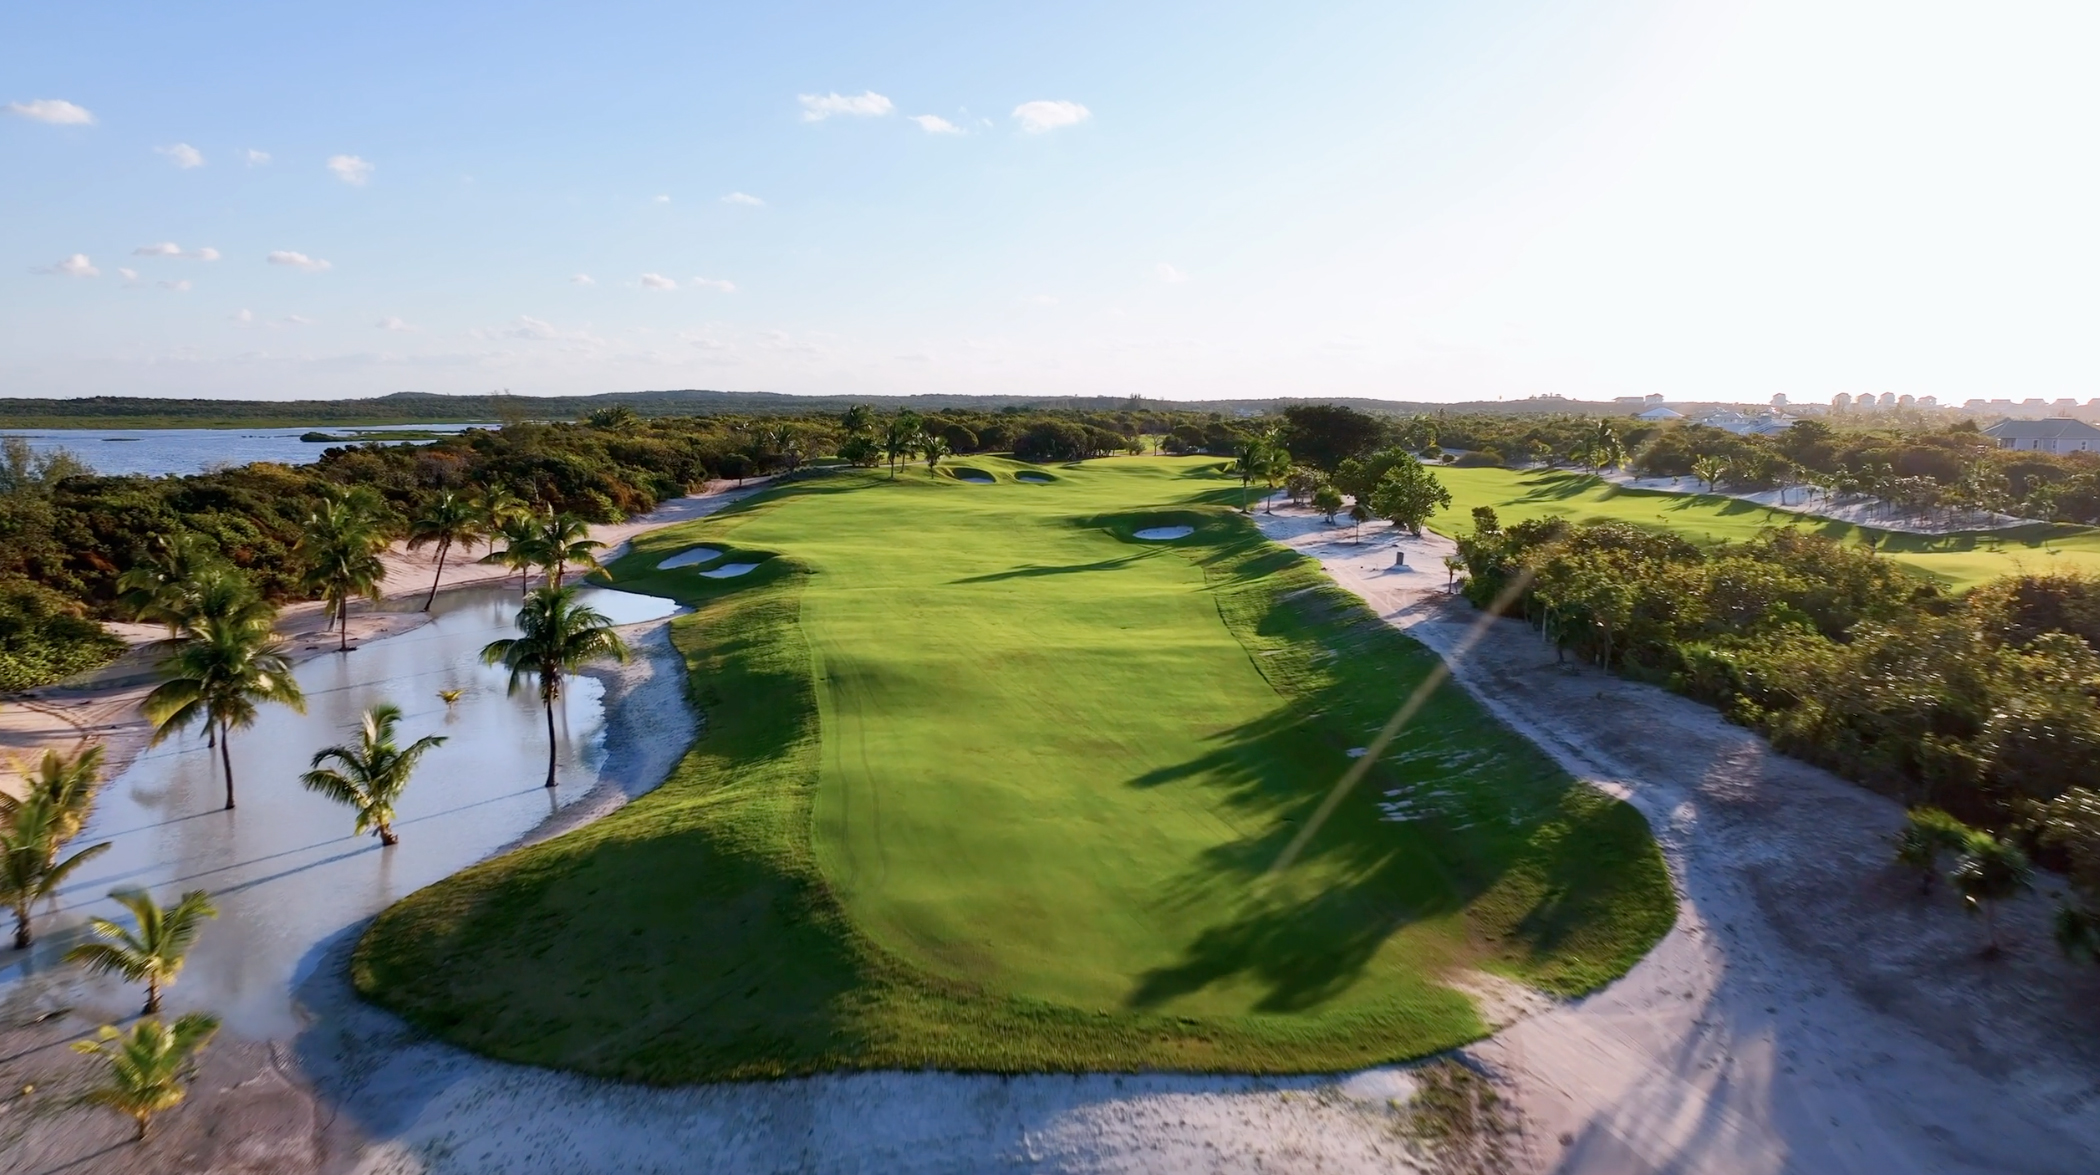 Aerial shot of Hole 11 from The Abaco Club golf course